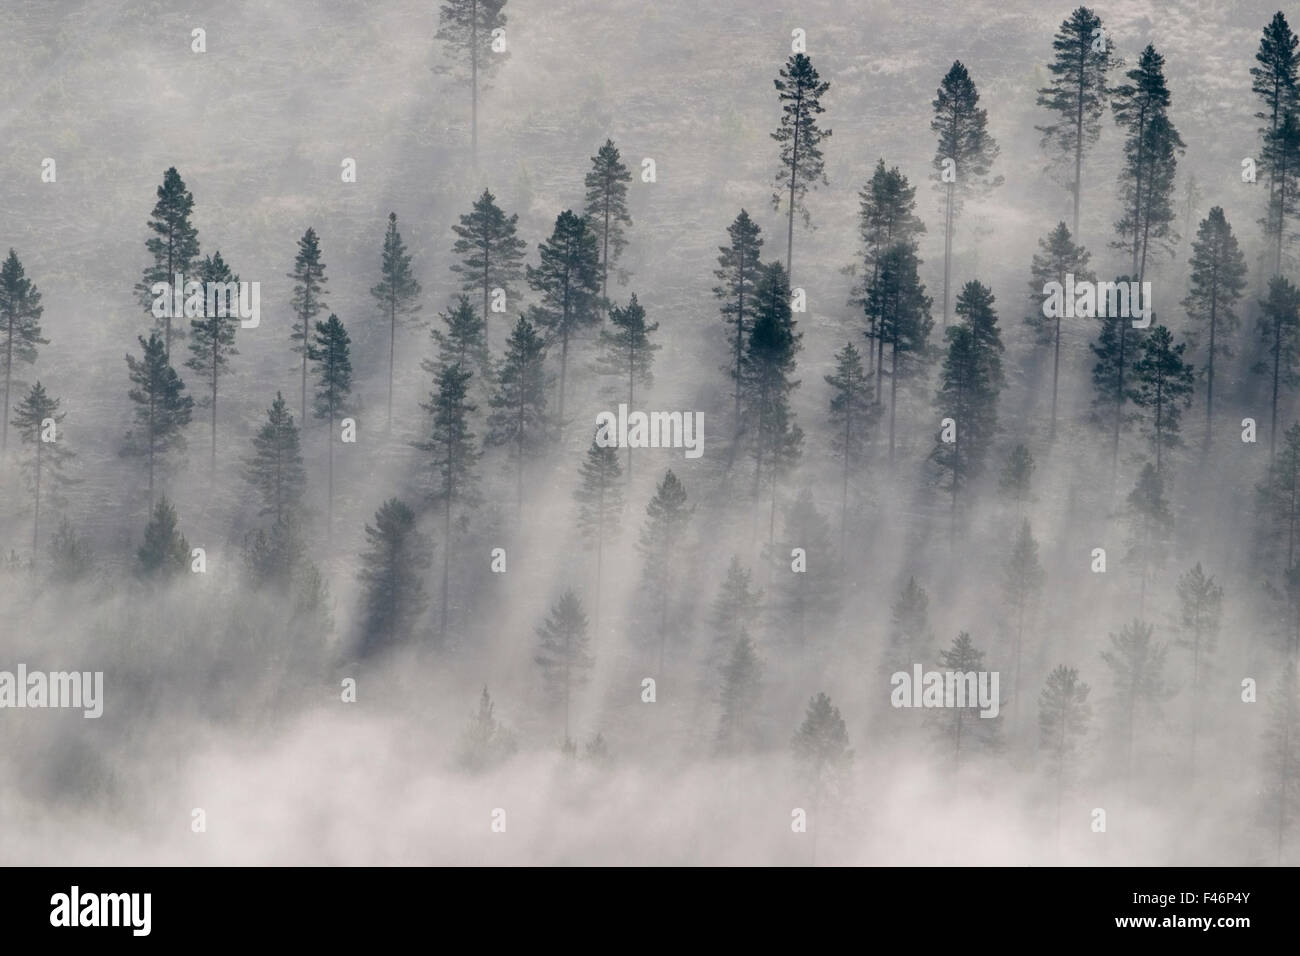 Forest, aerial view. Stock Photo